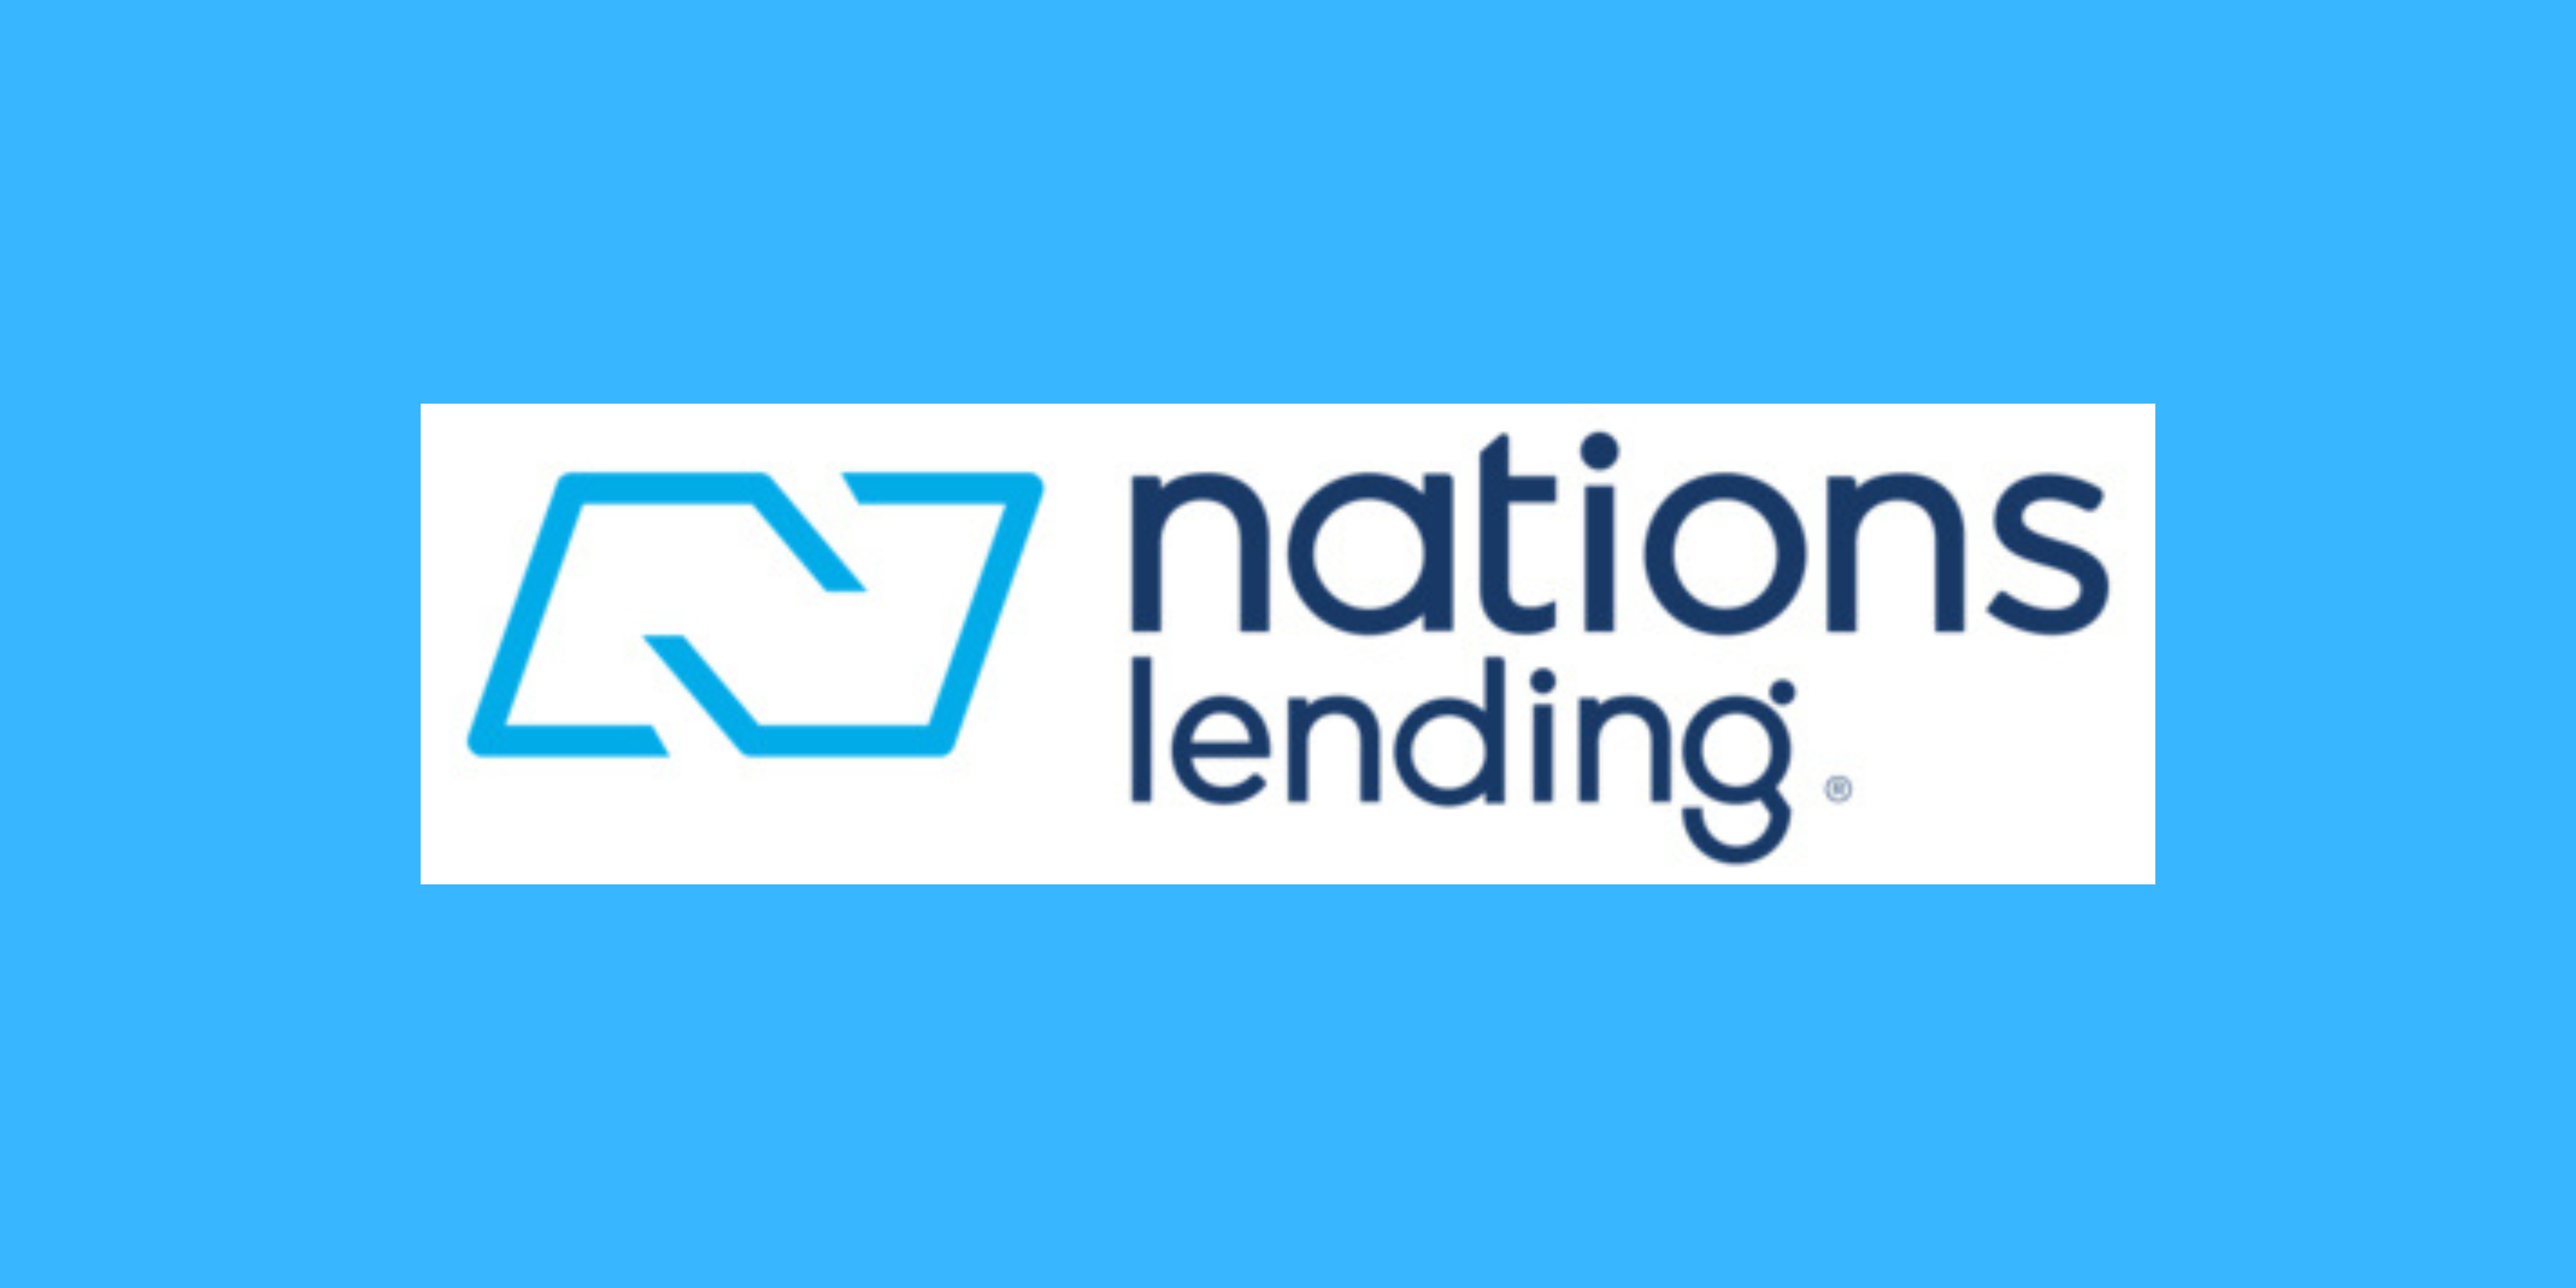 Hunter Jackson To Lead New Nations Lending Branch